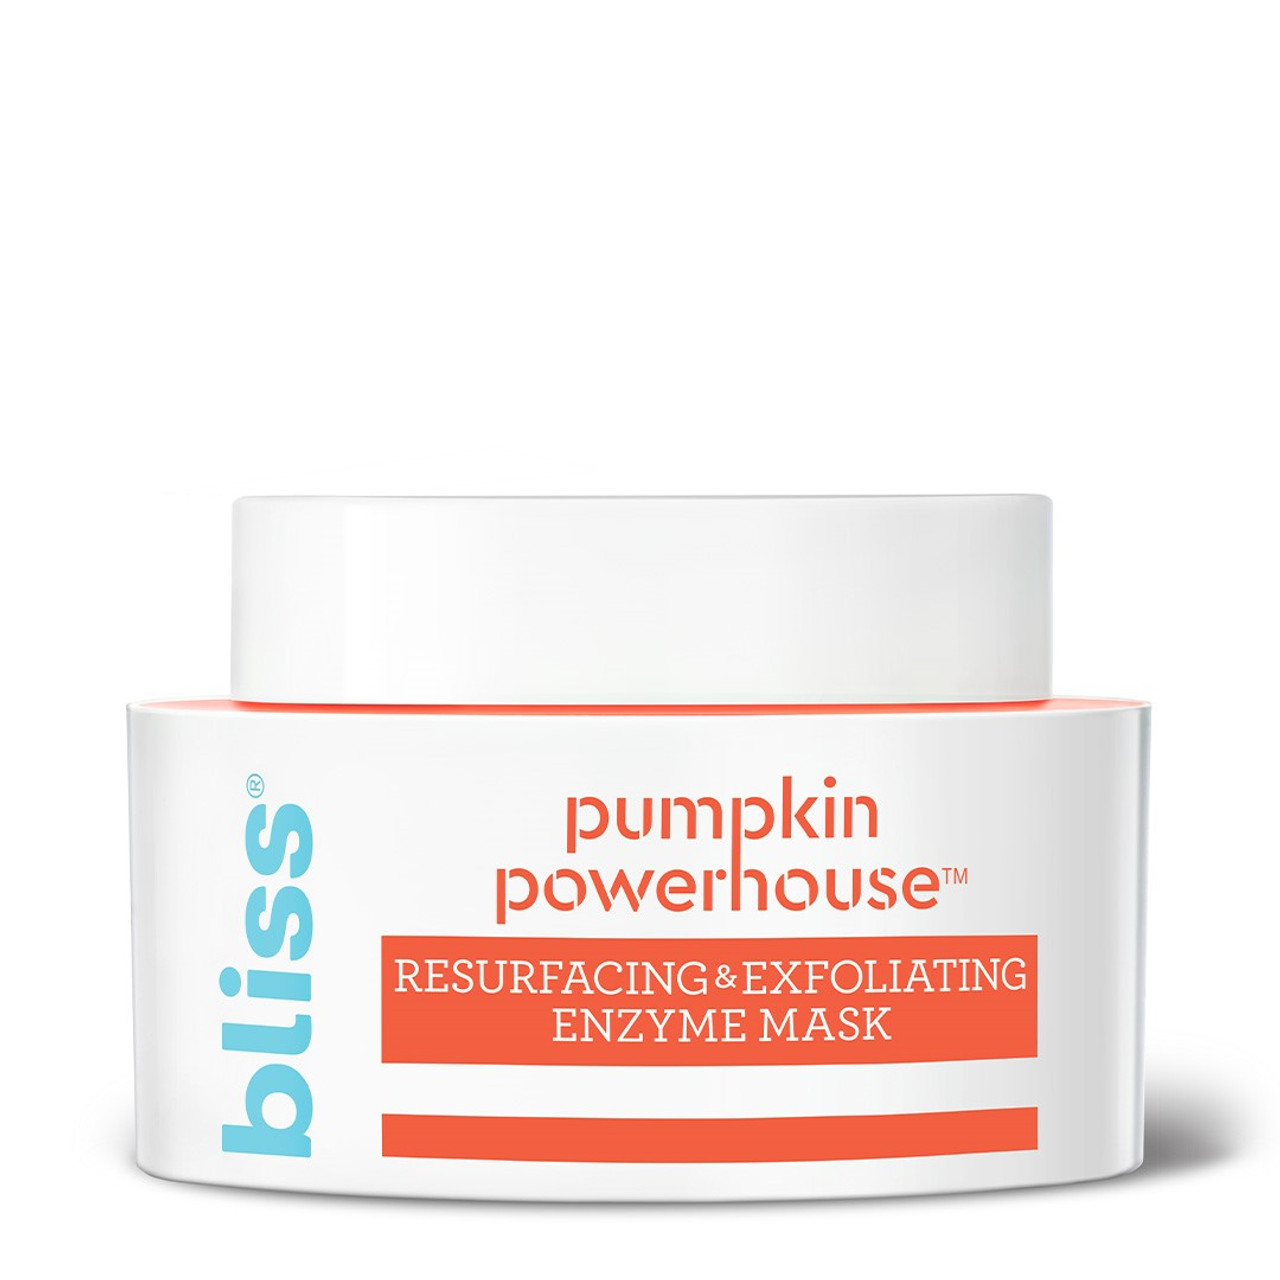 Bliss Pumpkin Powerhouse Resurfacing and Exfoliating Enzyme Face Mask with Shea Butter and Prebiotics | Clean | Cruelty-Free | Paraben Free | Vegan | 1.7 oz